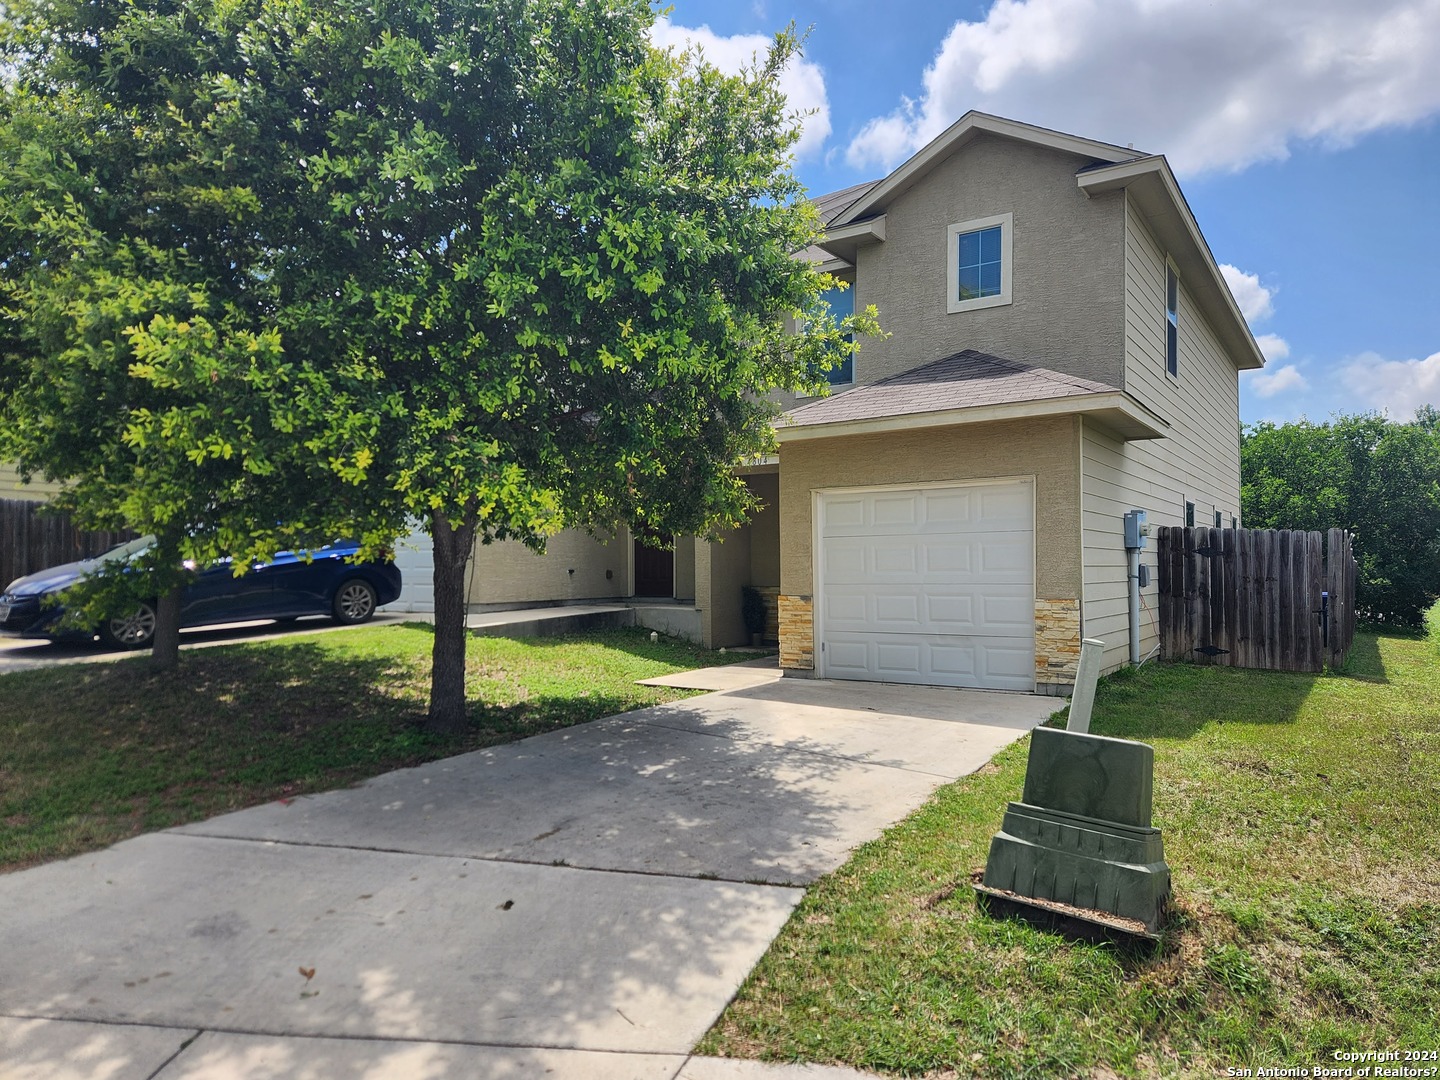 Photo of 4804-4806 Appleseed Ct in San Antonio, TX